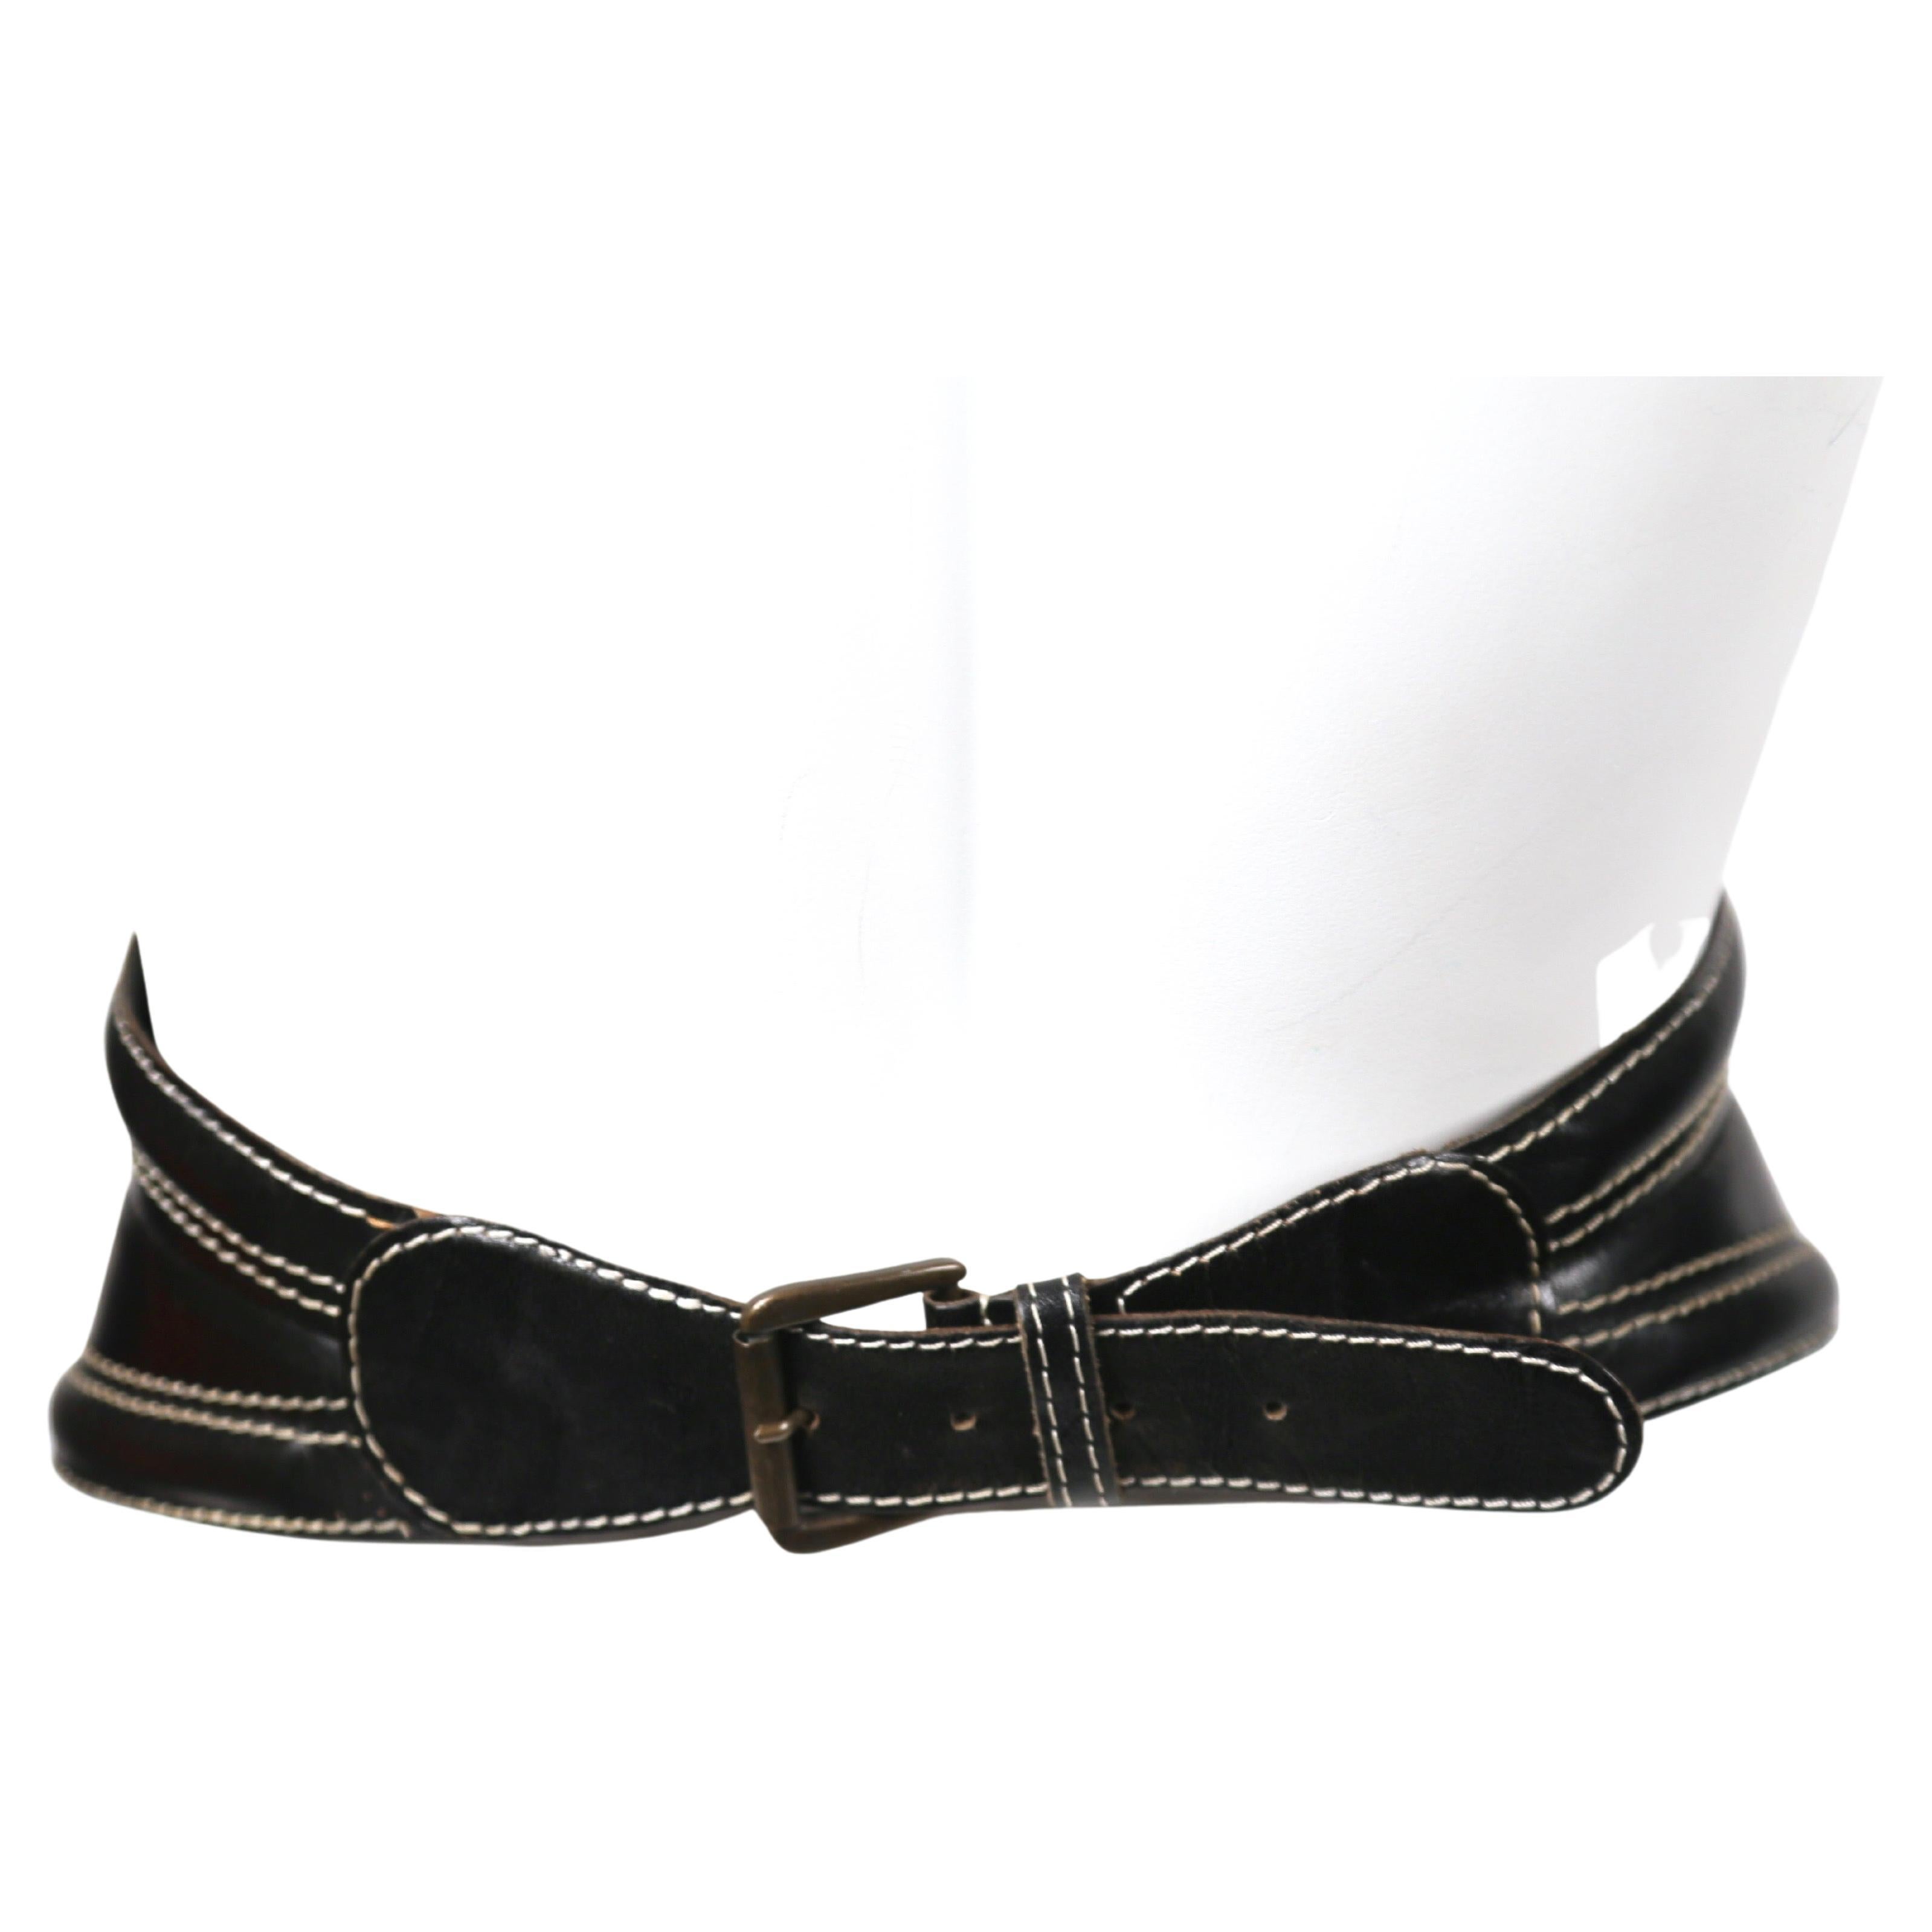 1980's GIANFRANCO FERRE wide black leather belt with top-stitching For Sale 1